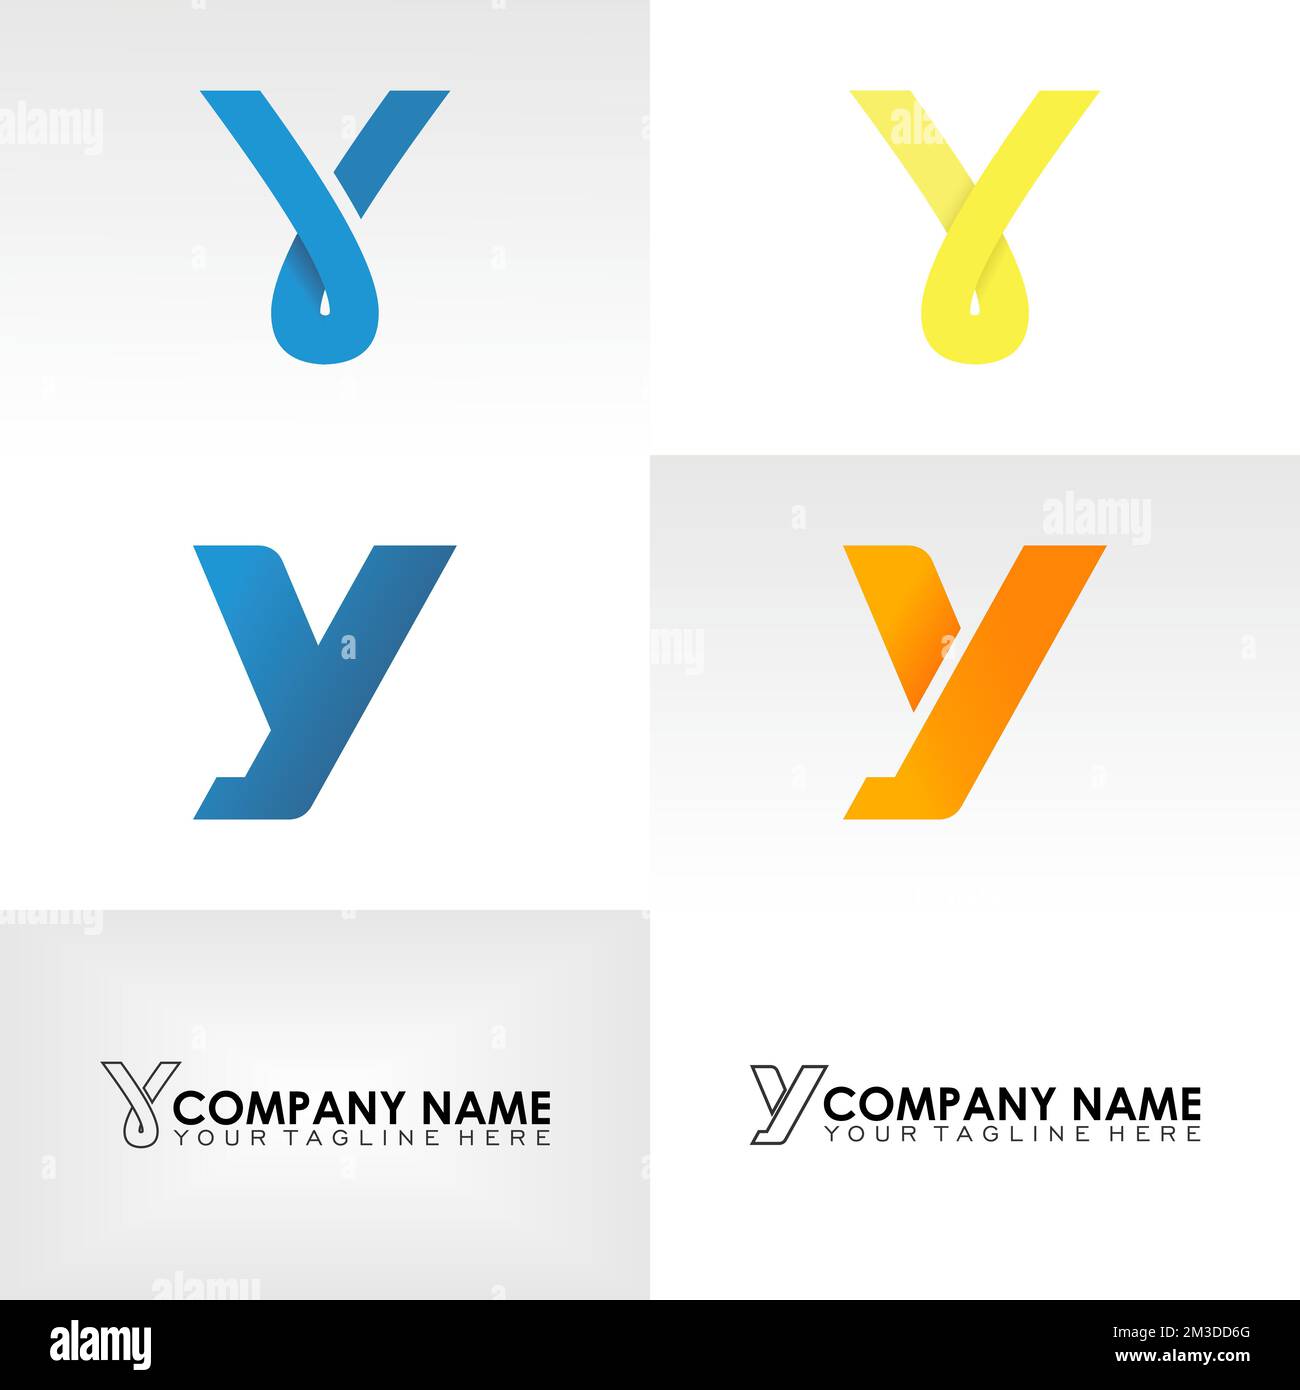 Letter or word Y font image graphic icon logo design abstract concept vector stock. Can be used as a symbol related to initial or monogram Stock Vector